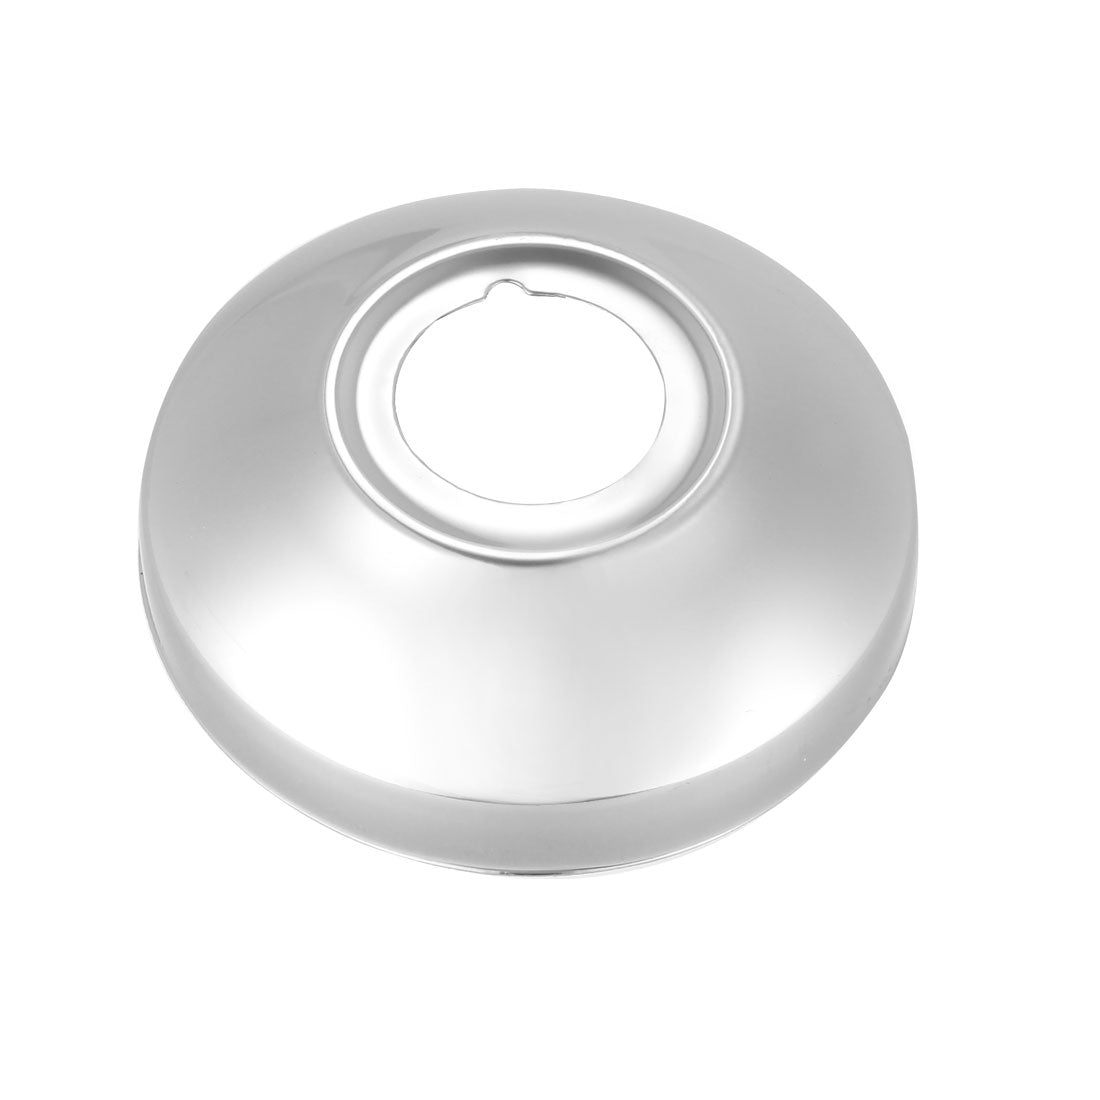 uxcell Uxcell Round Escutcheon Plate 61x20mm Stainless Steel Polishing for 21mm Diameter Pipe 2Pcs